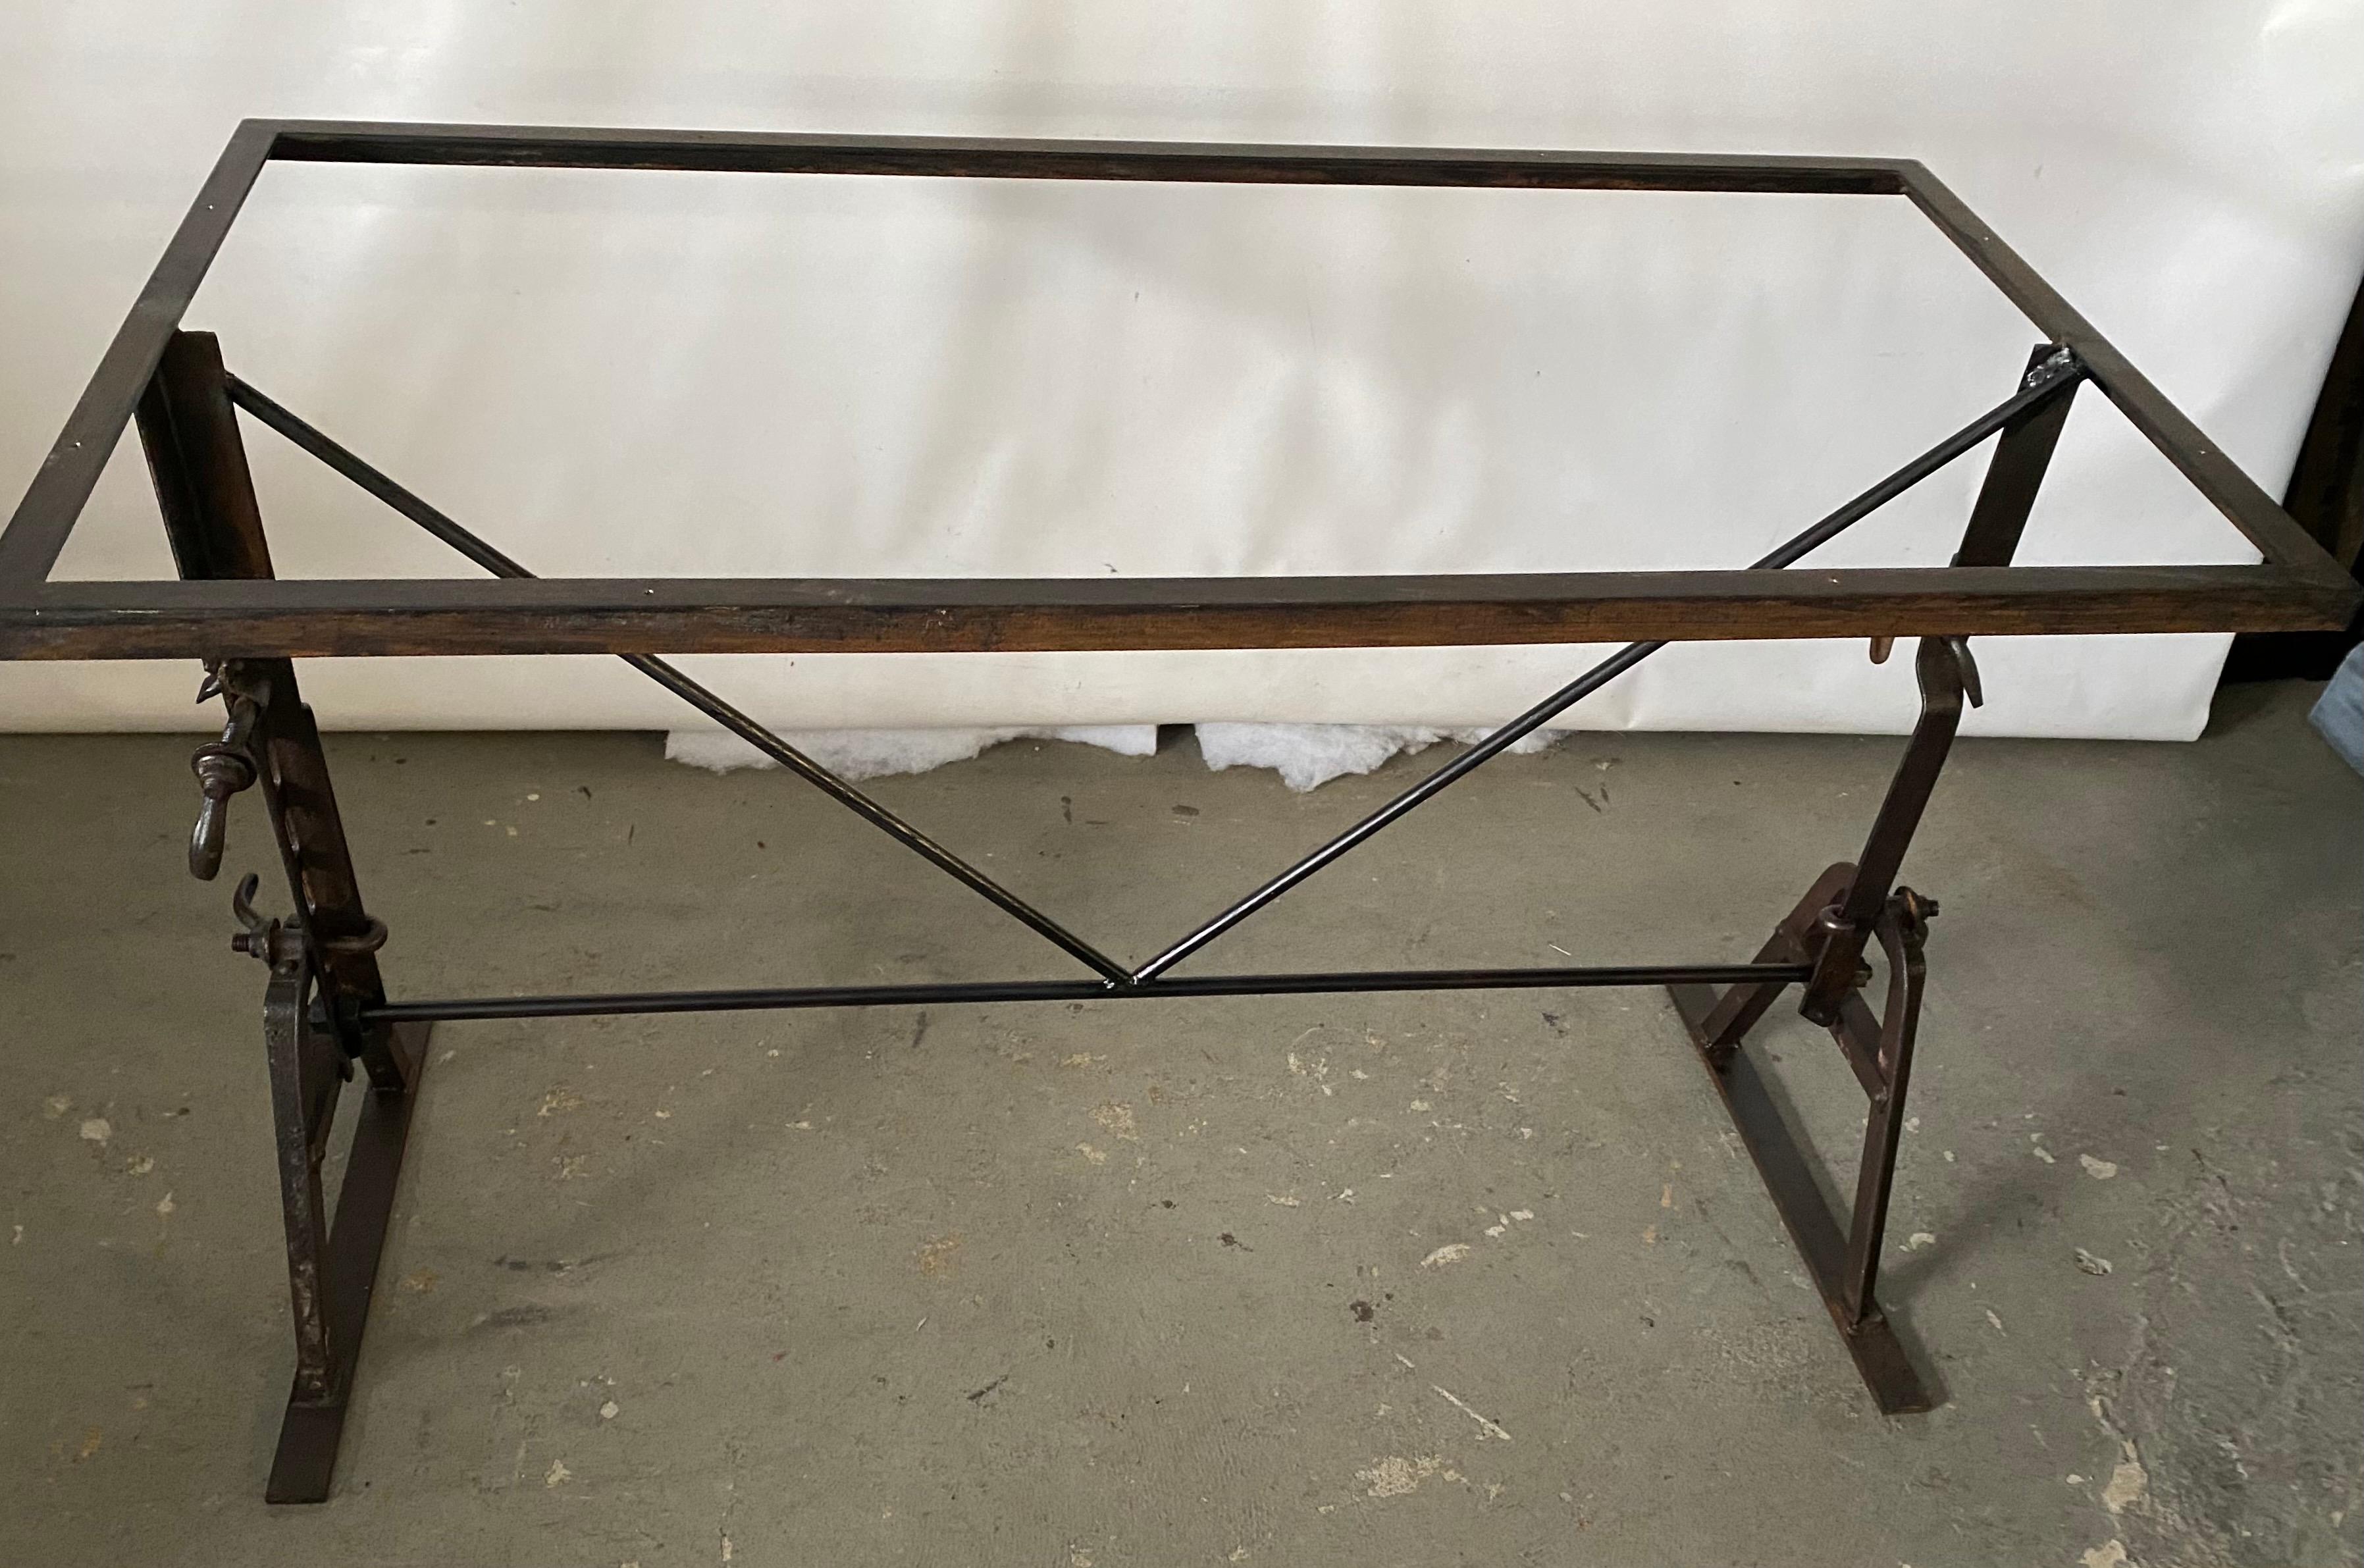 These antique metal workbench saw horses have been adapted and made into a stylish dining table base. Add your own table top -- stone, glass or wood and have a table that will be perfect in any decor, be it classical, modern, Use it as a garden